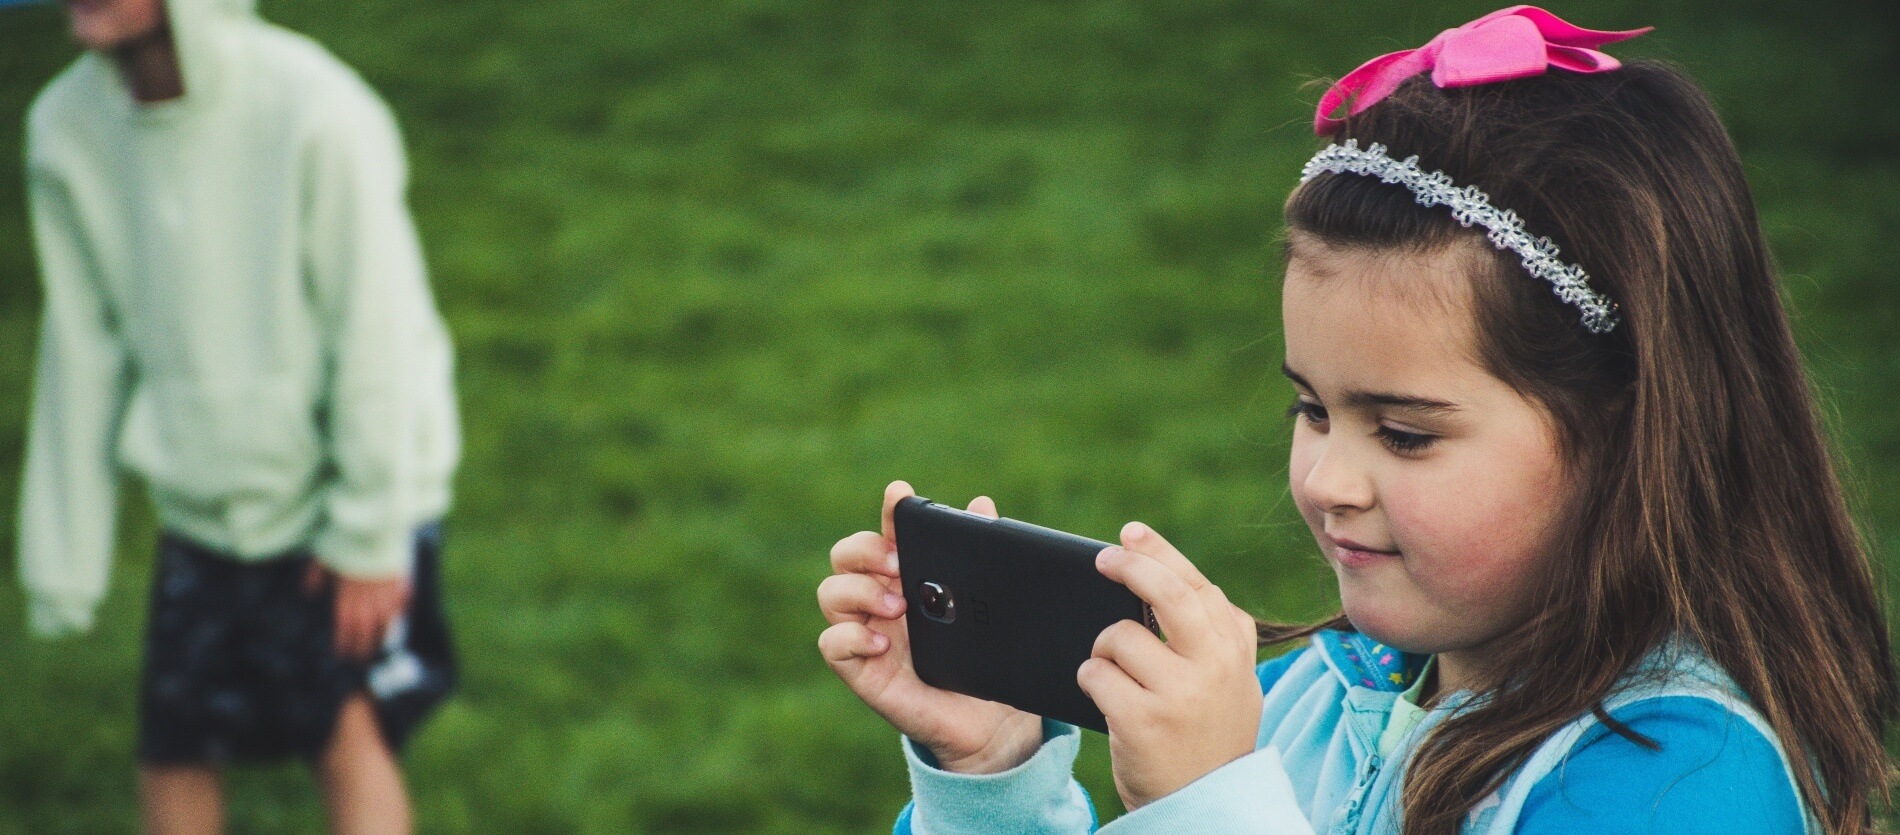 A young girl using a smartphone outside